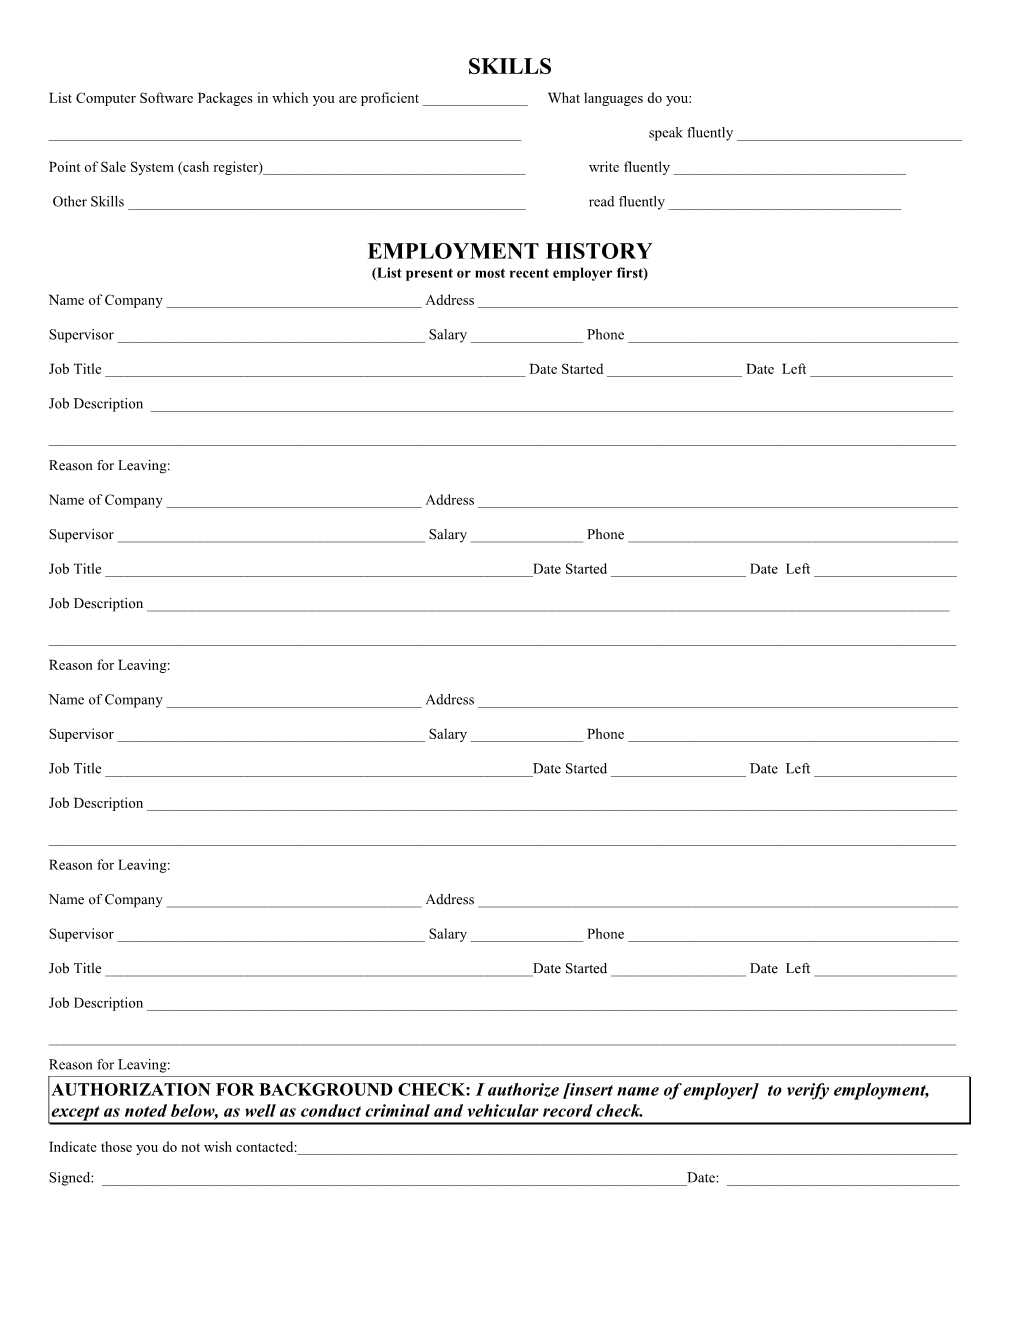 US Sample Employment Application (Includes Criminal History Question)